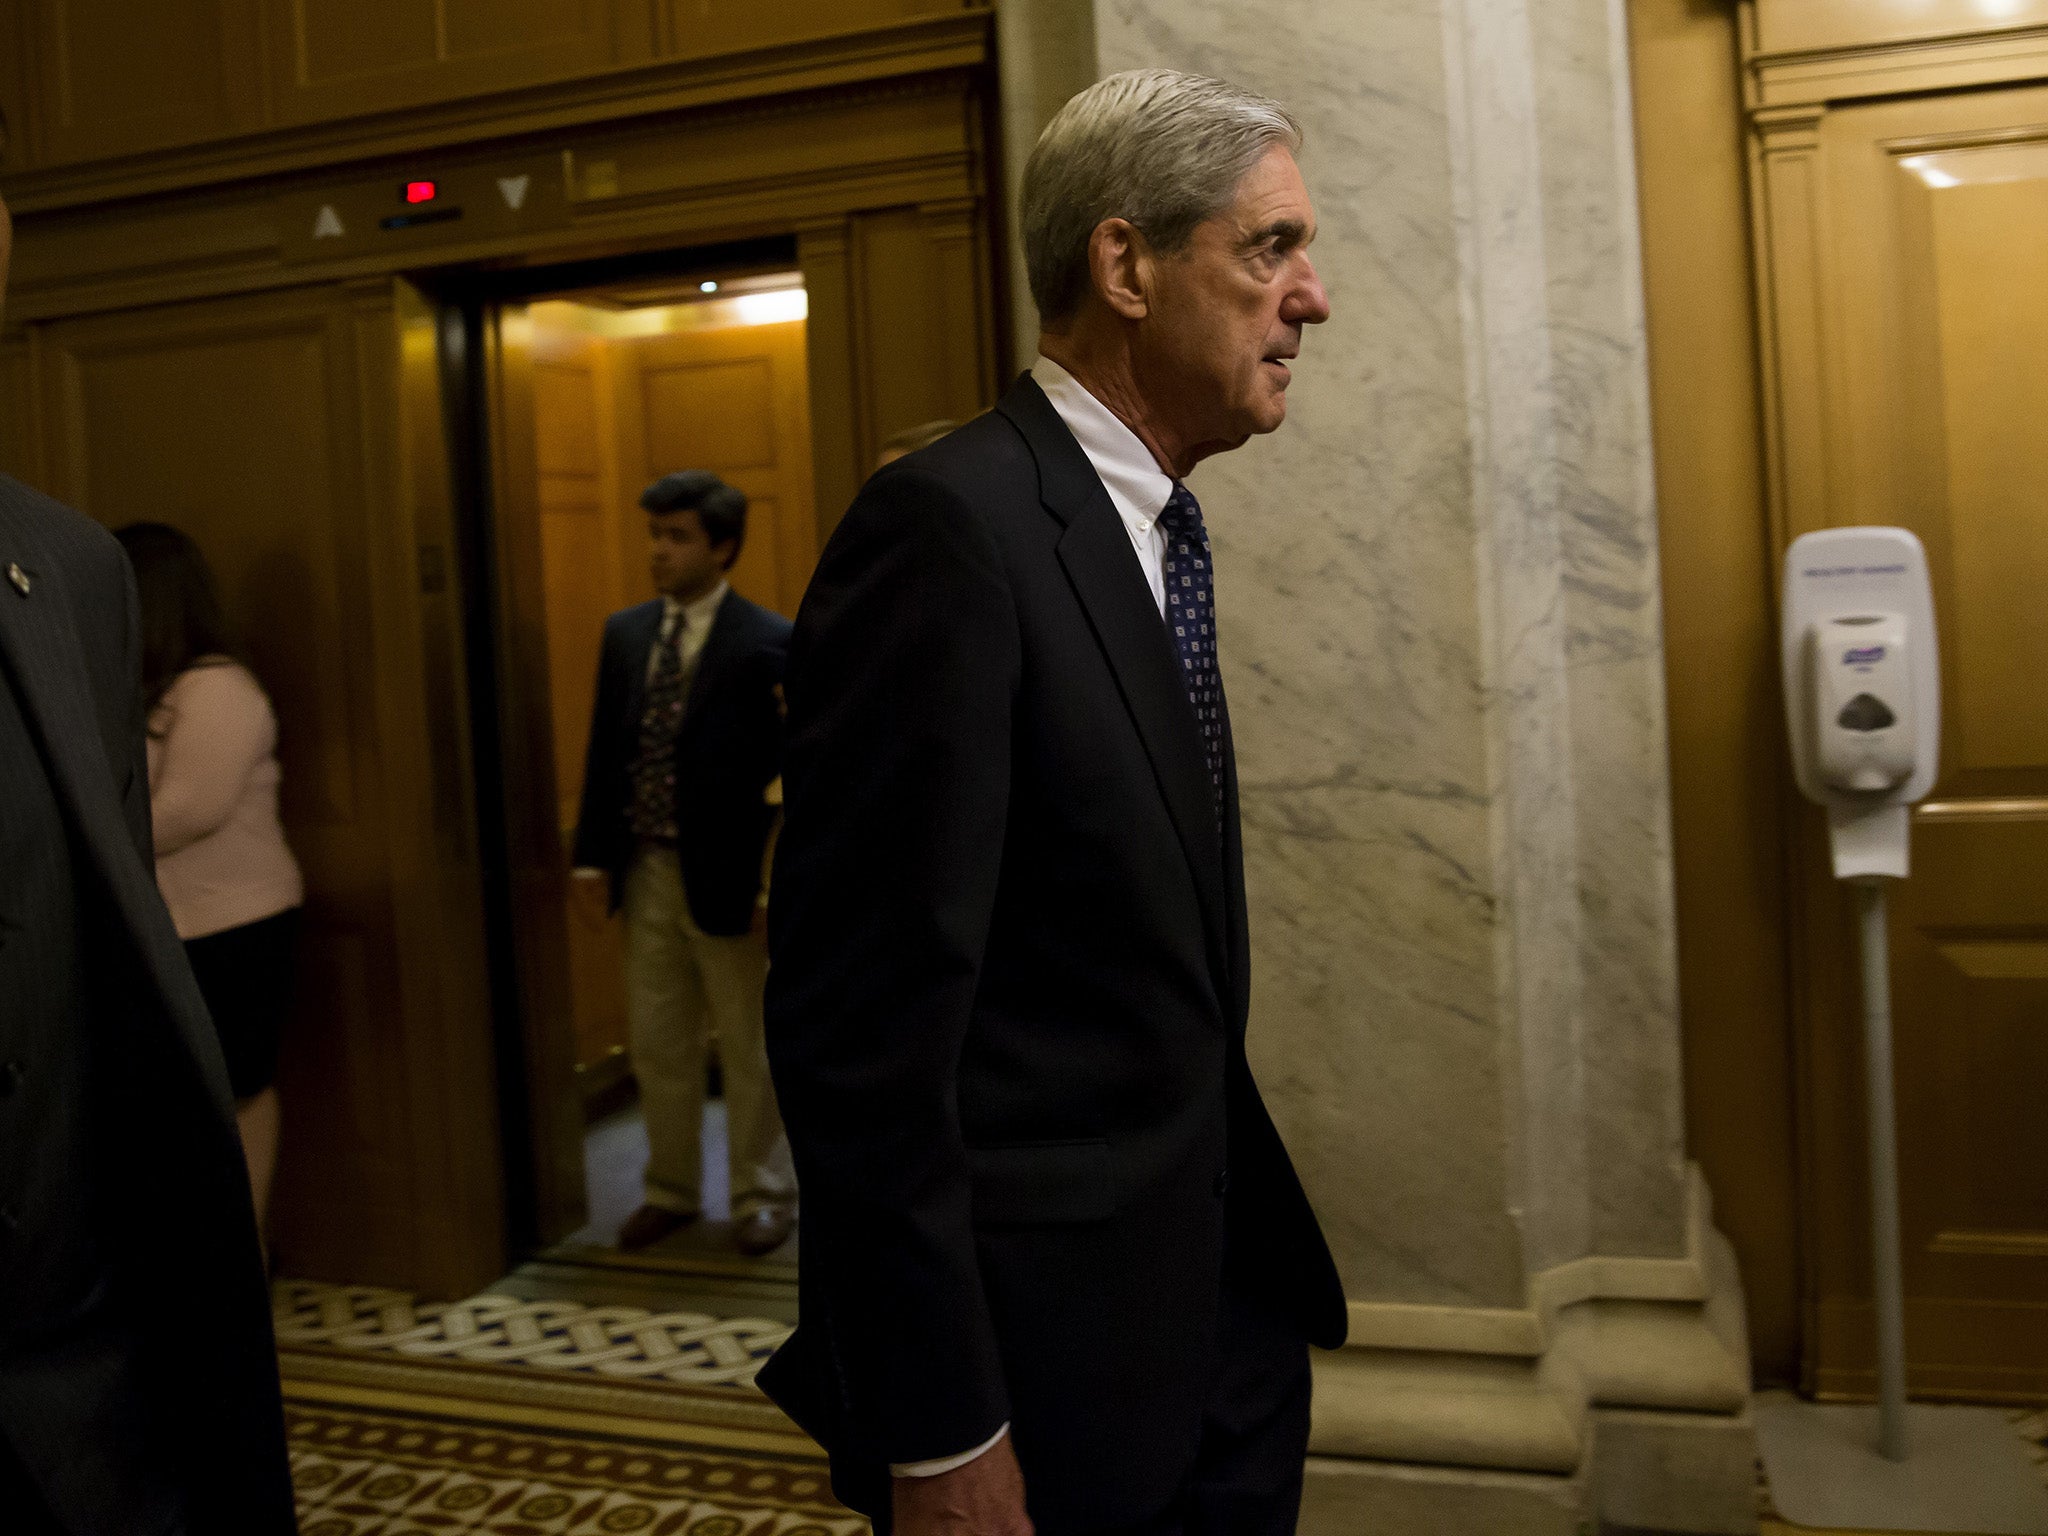 Will the midterms give new life to the Robert Mueller investigation into possible collusion with Russia?